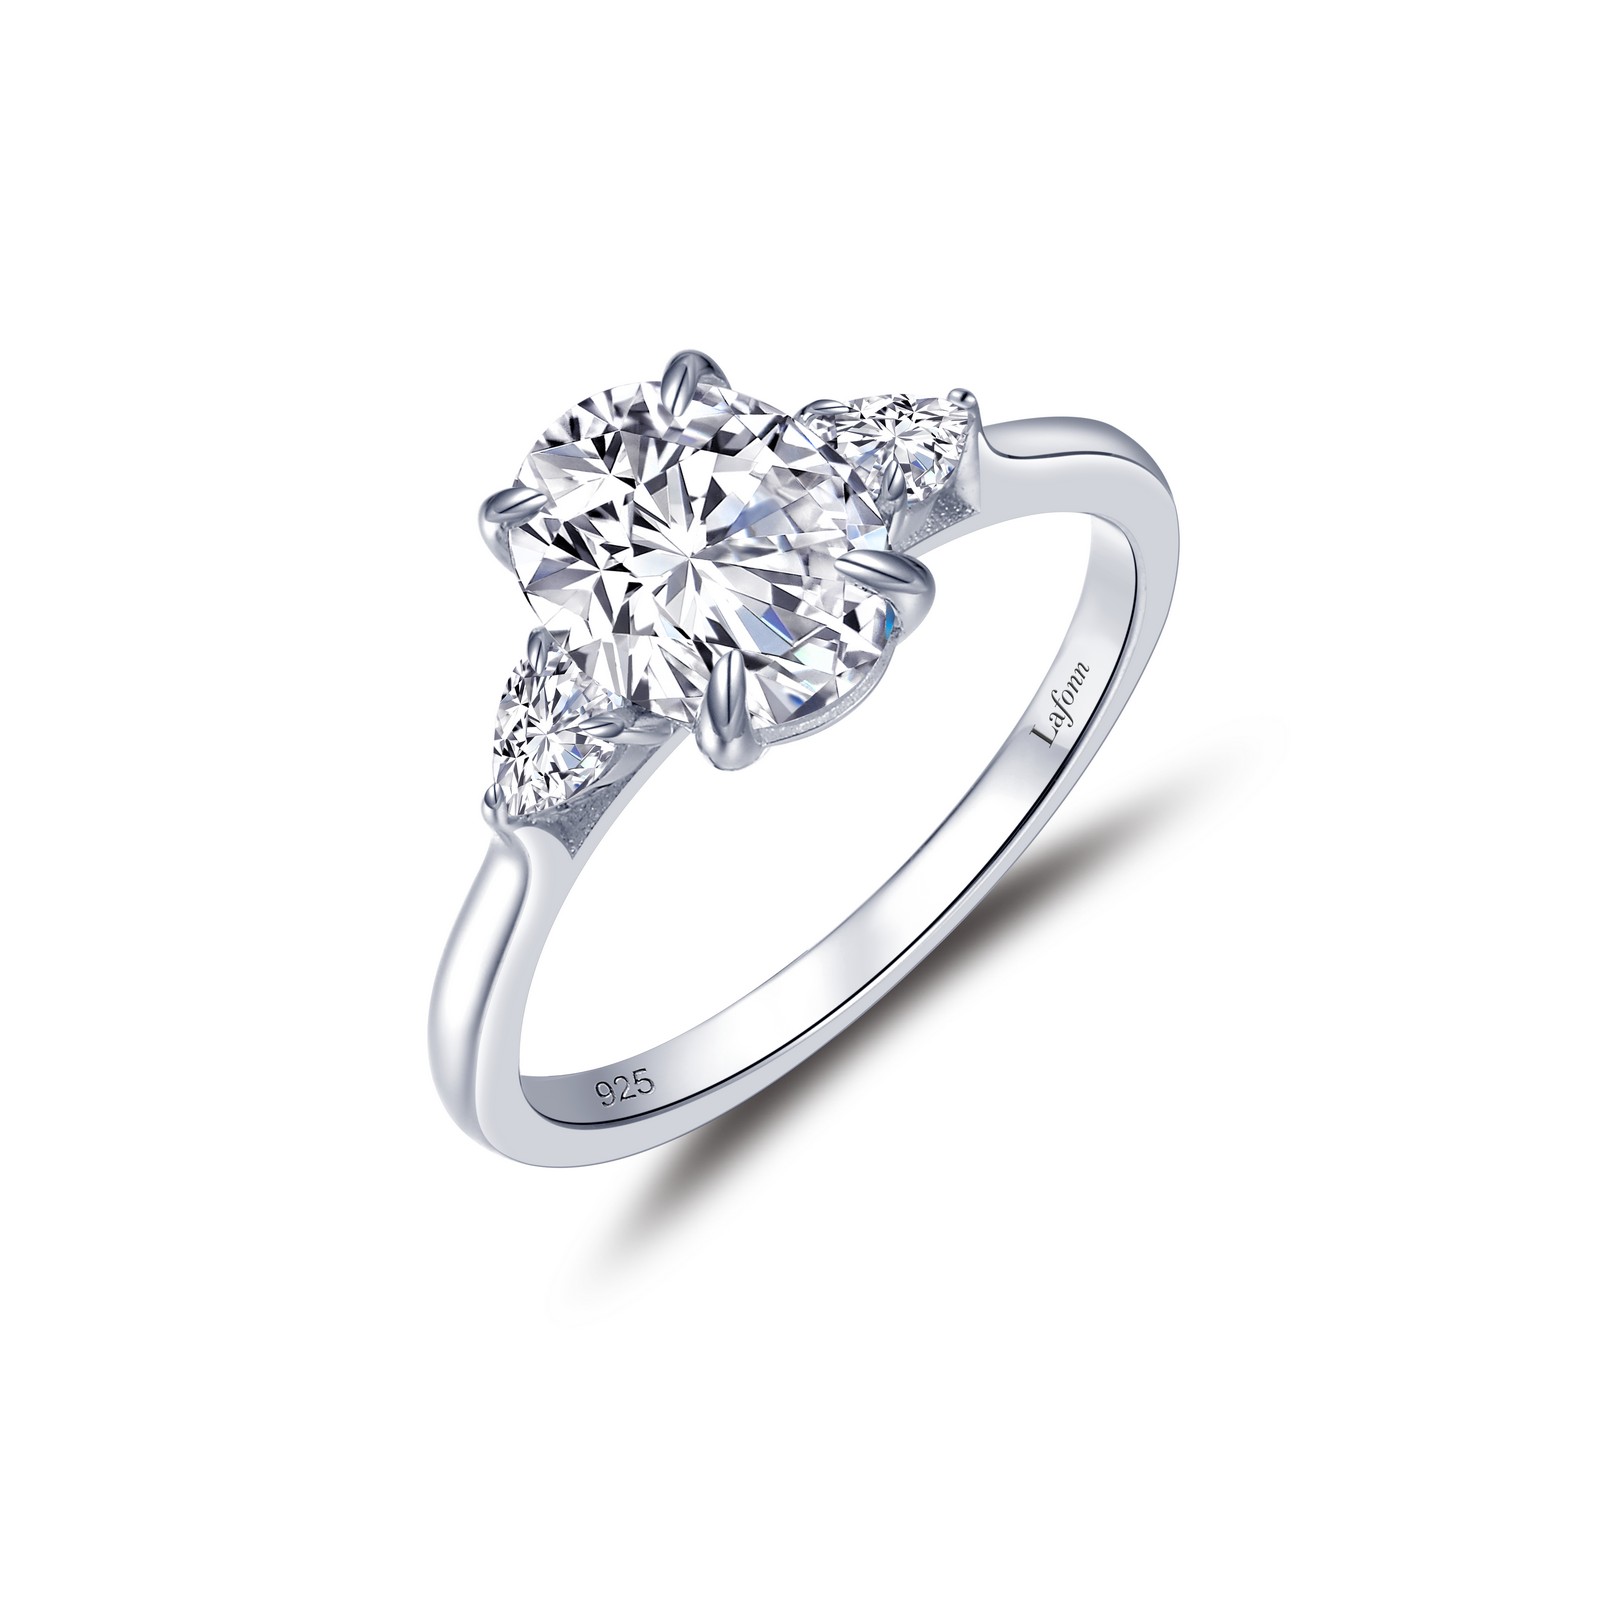 Classic Three-Stone Engagement Ring - A timeless classic. This radiant ring features an oval Lafonn Lassaire simulated diamond in the center with a single pear-shaped simulated diamond on each side. It is set in sterling silver bonded with platinum.